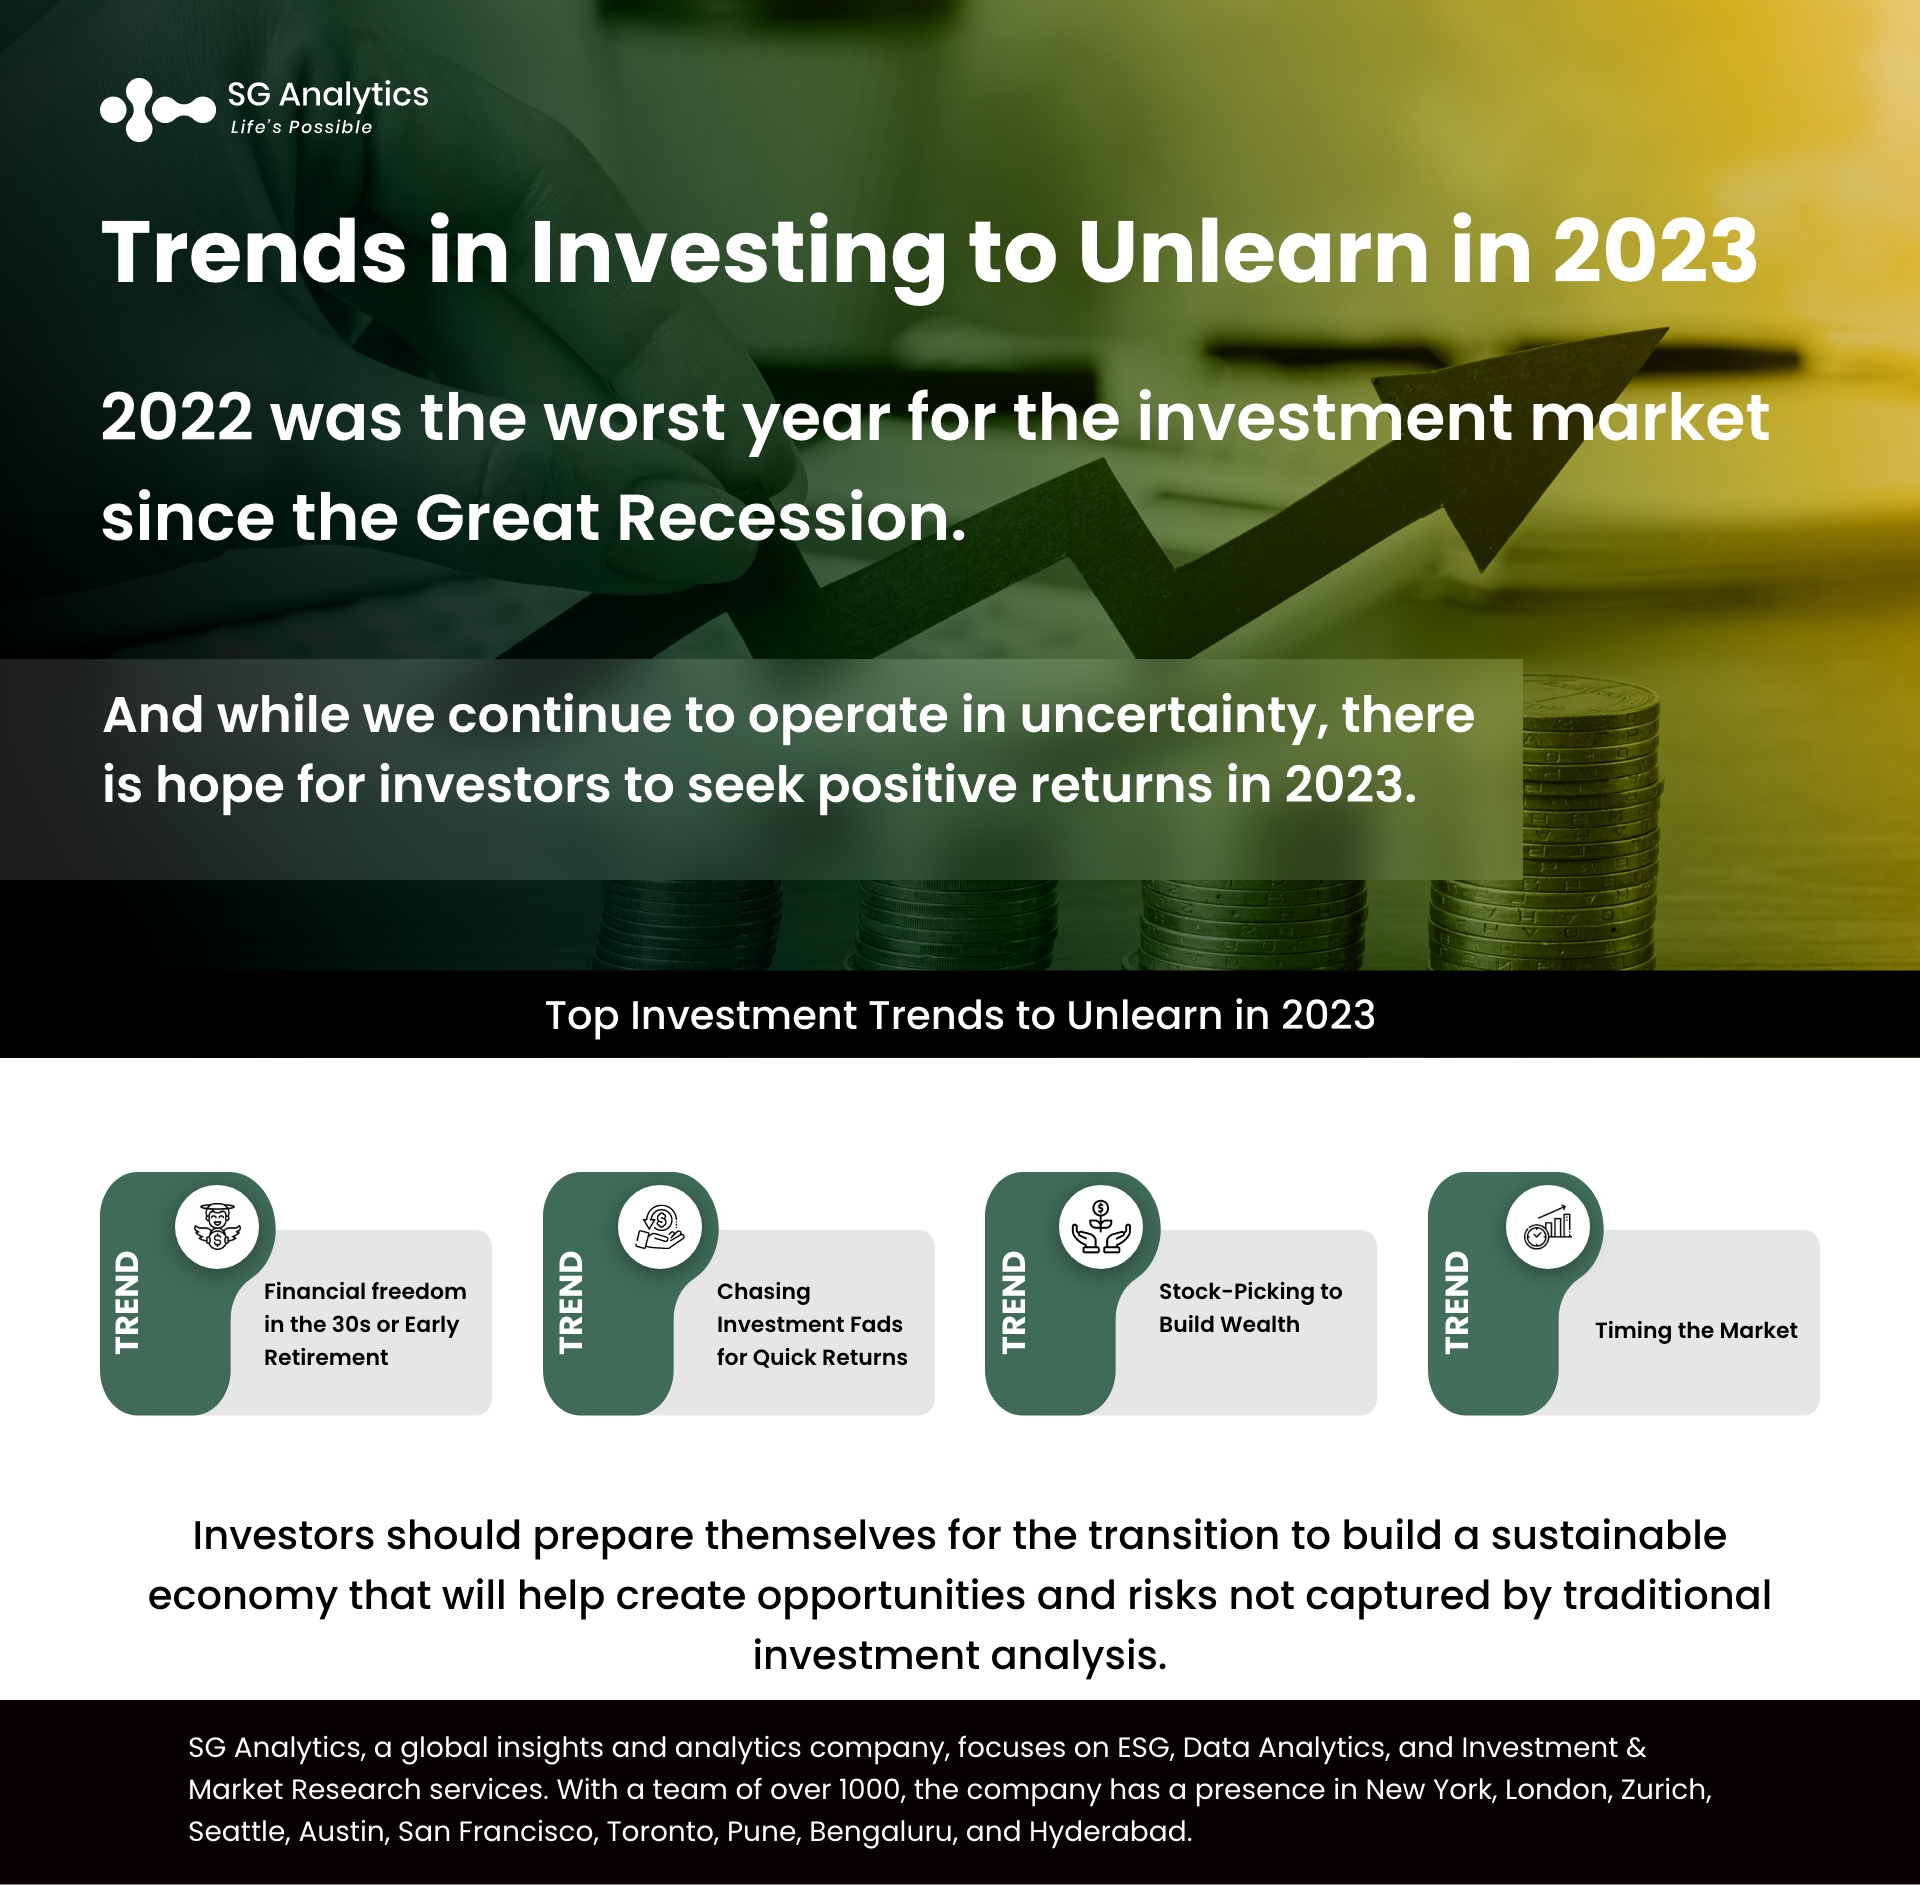 Trends in Investing to Unlearn in 2023